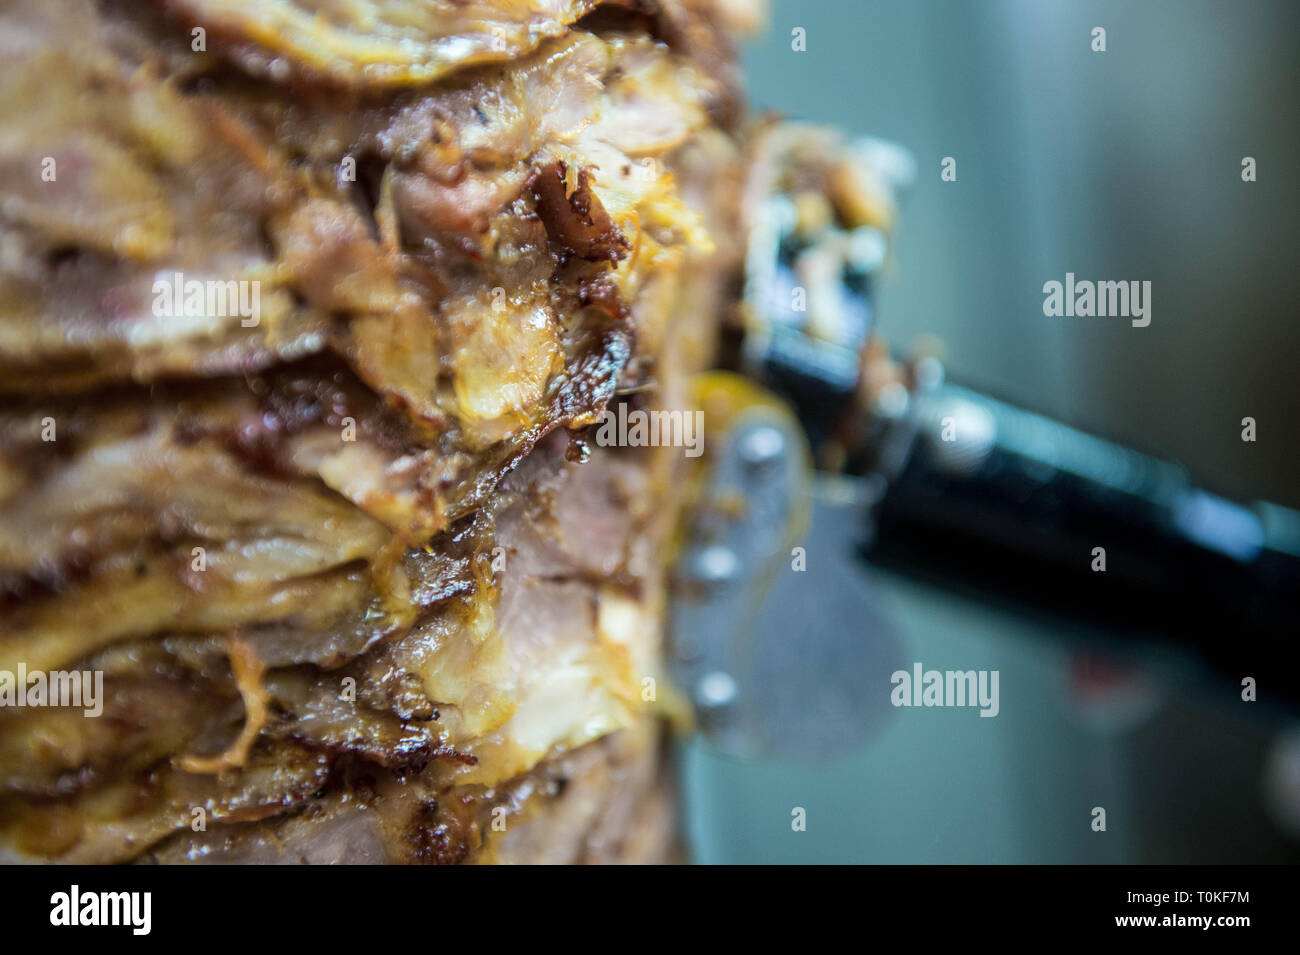 Detail of a Donner kebab meat in a Kebab shop Stock Photo